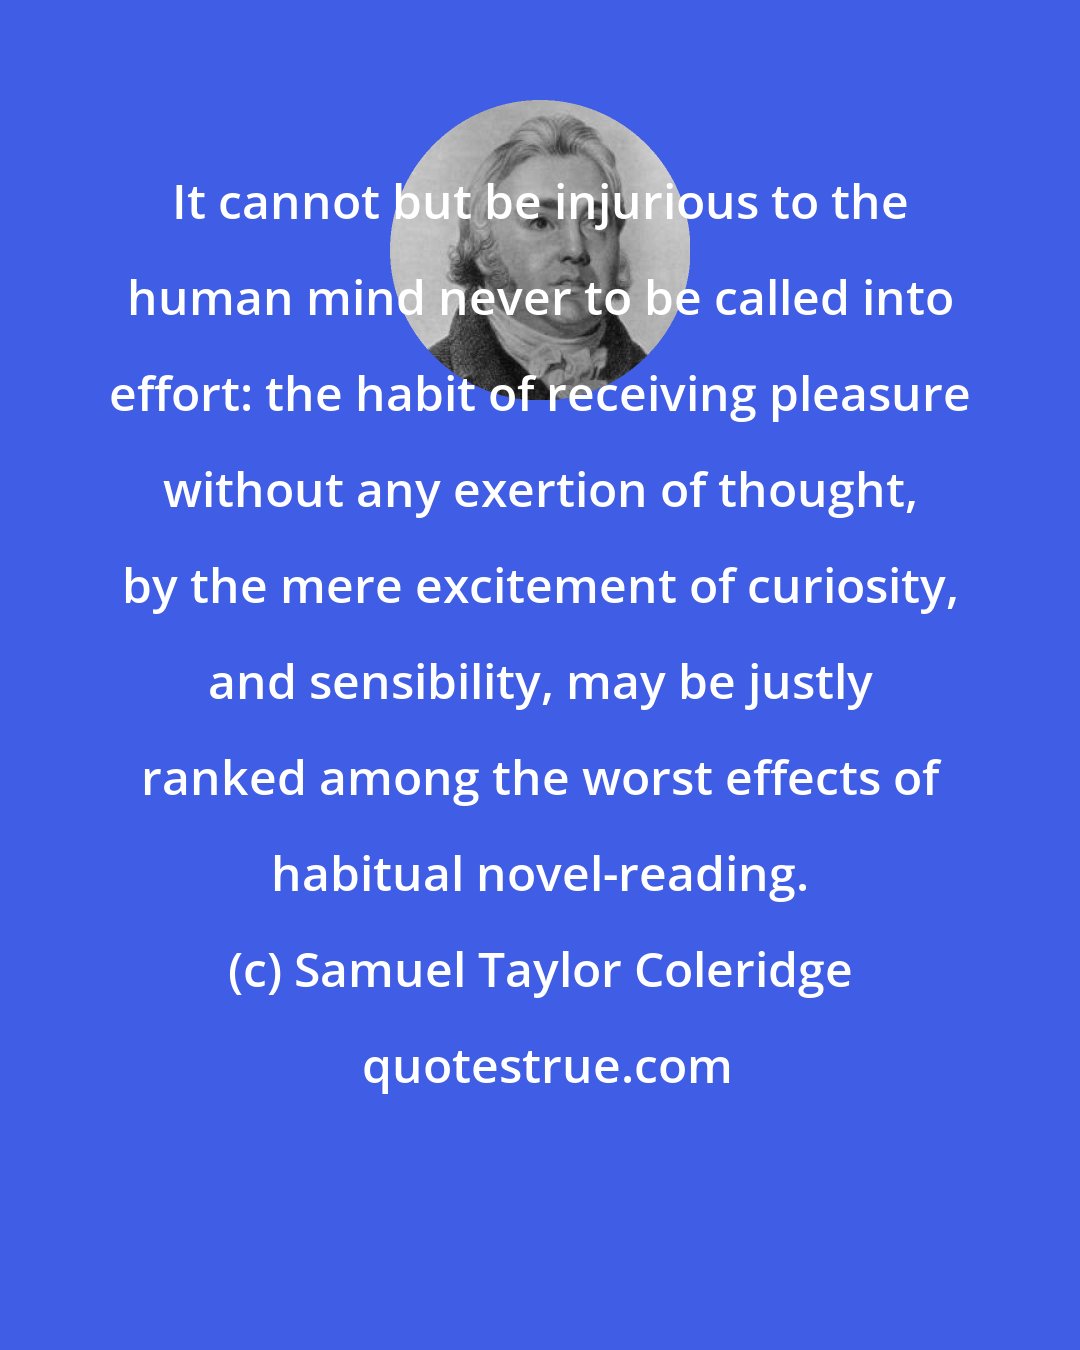 Samuel Taylor Coleridge: It cannot but be injurious to the human mind never to be called into effort: the habit of receiving pleasure without any exertion of thought, by the mere excitement of curiosity, and sensibility, may be justly ranked among the worst effects of habitual novel-reading.